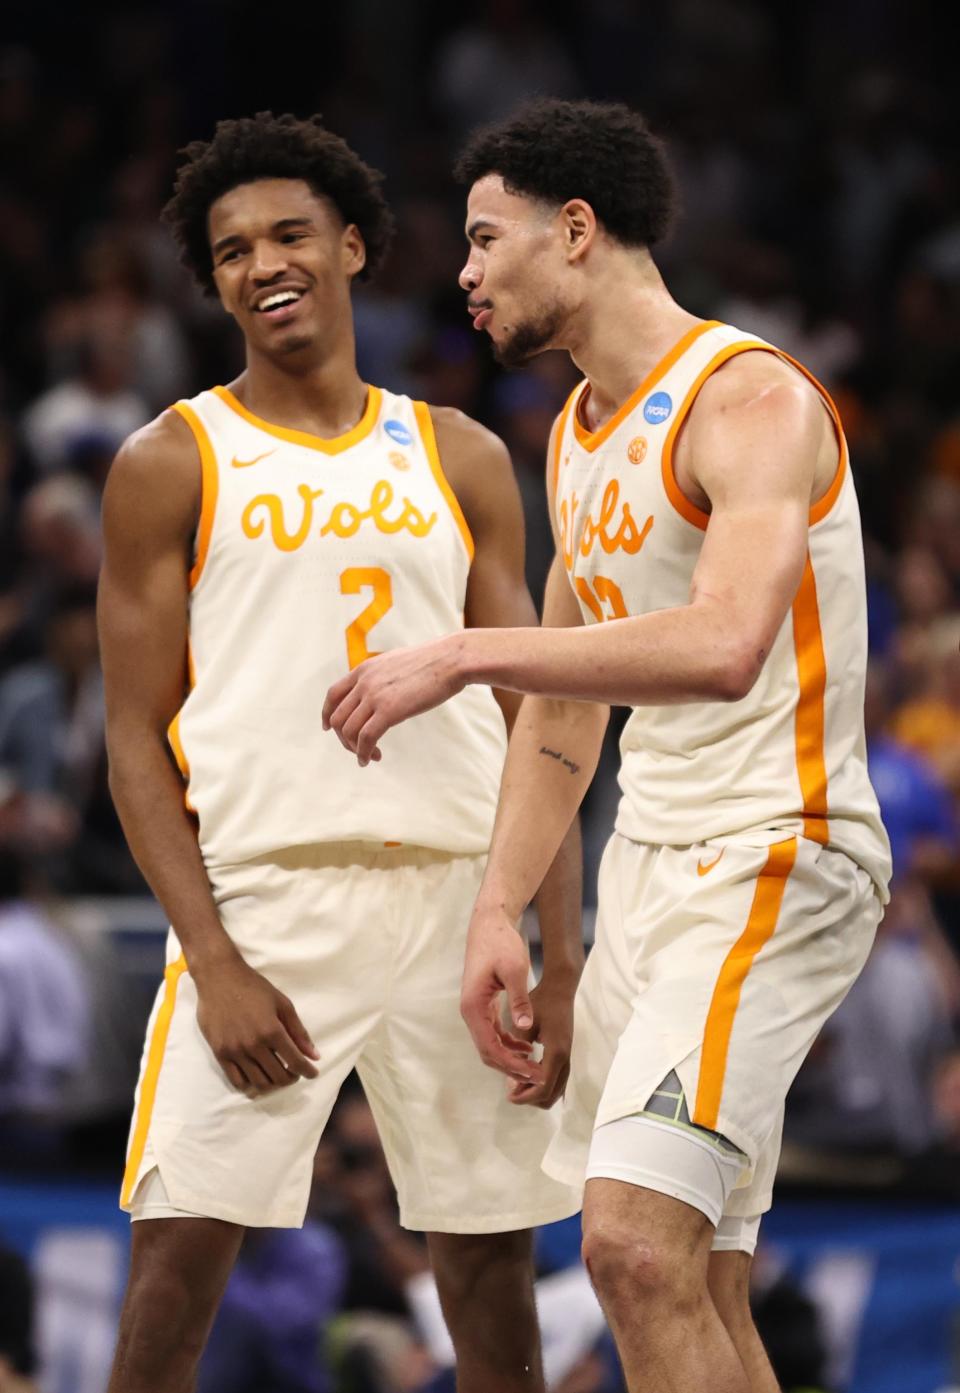 Former Tennessee players Julian Phillips (2) and Olivier Nkamhoua celebrate March 18, 2023, after the Vols defeated the Duke Blue Devils in the second round of the 2023 NCAA Tournament.